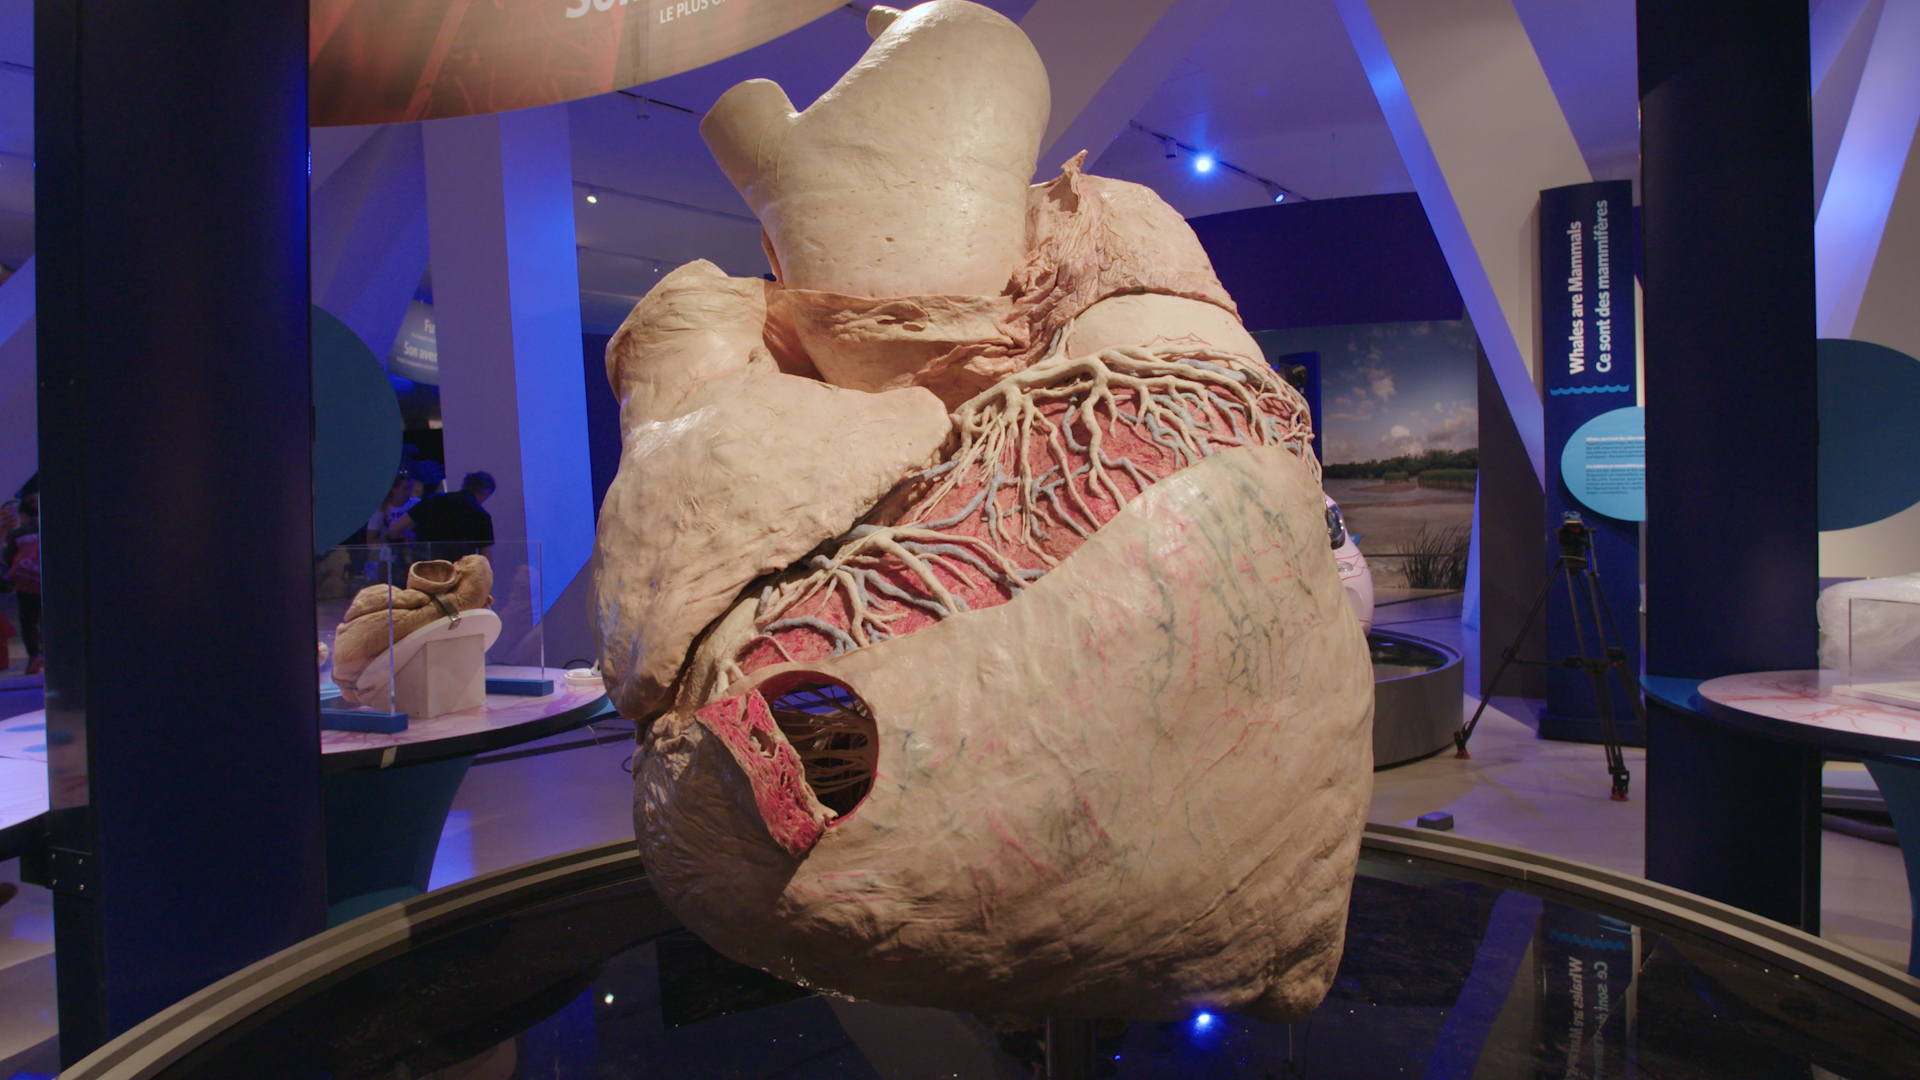 The World's Largest Heart Goes on Display - VICE Video: Documentaries,  Films, News Videos